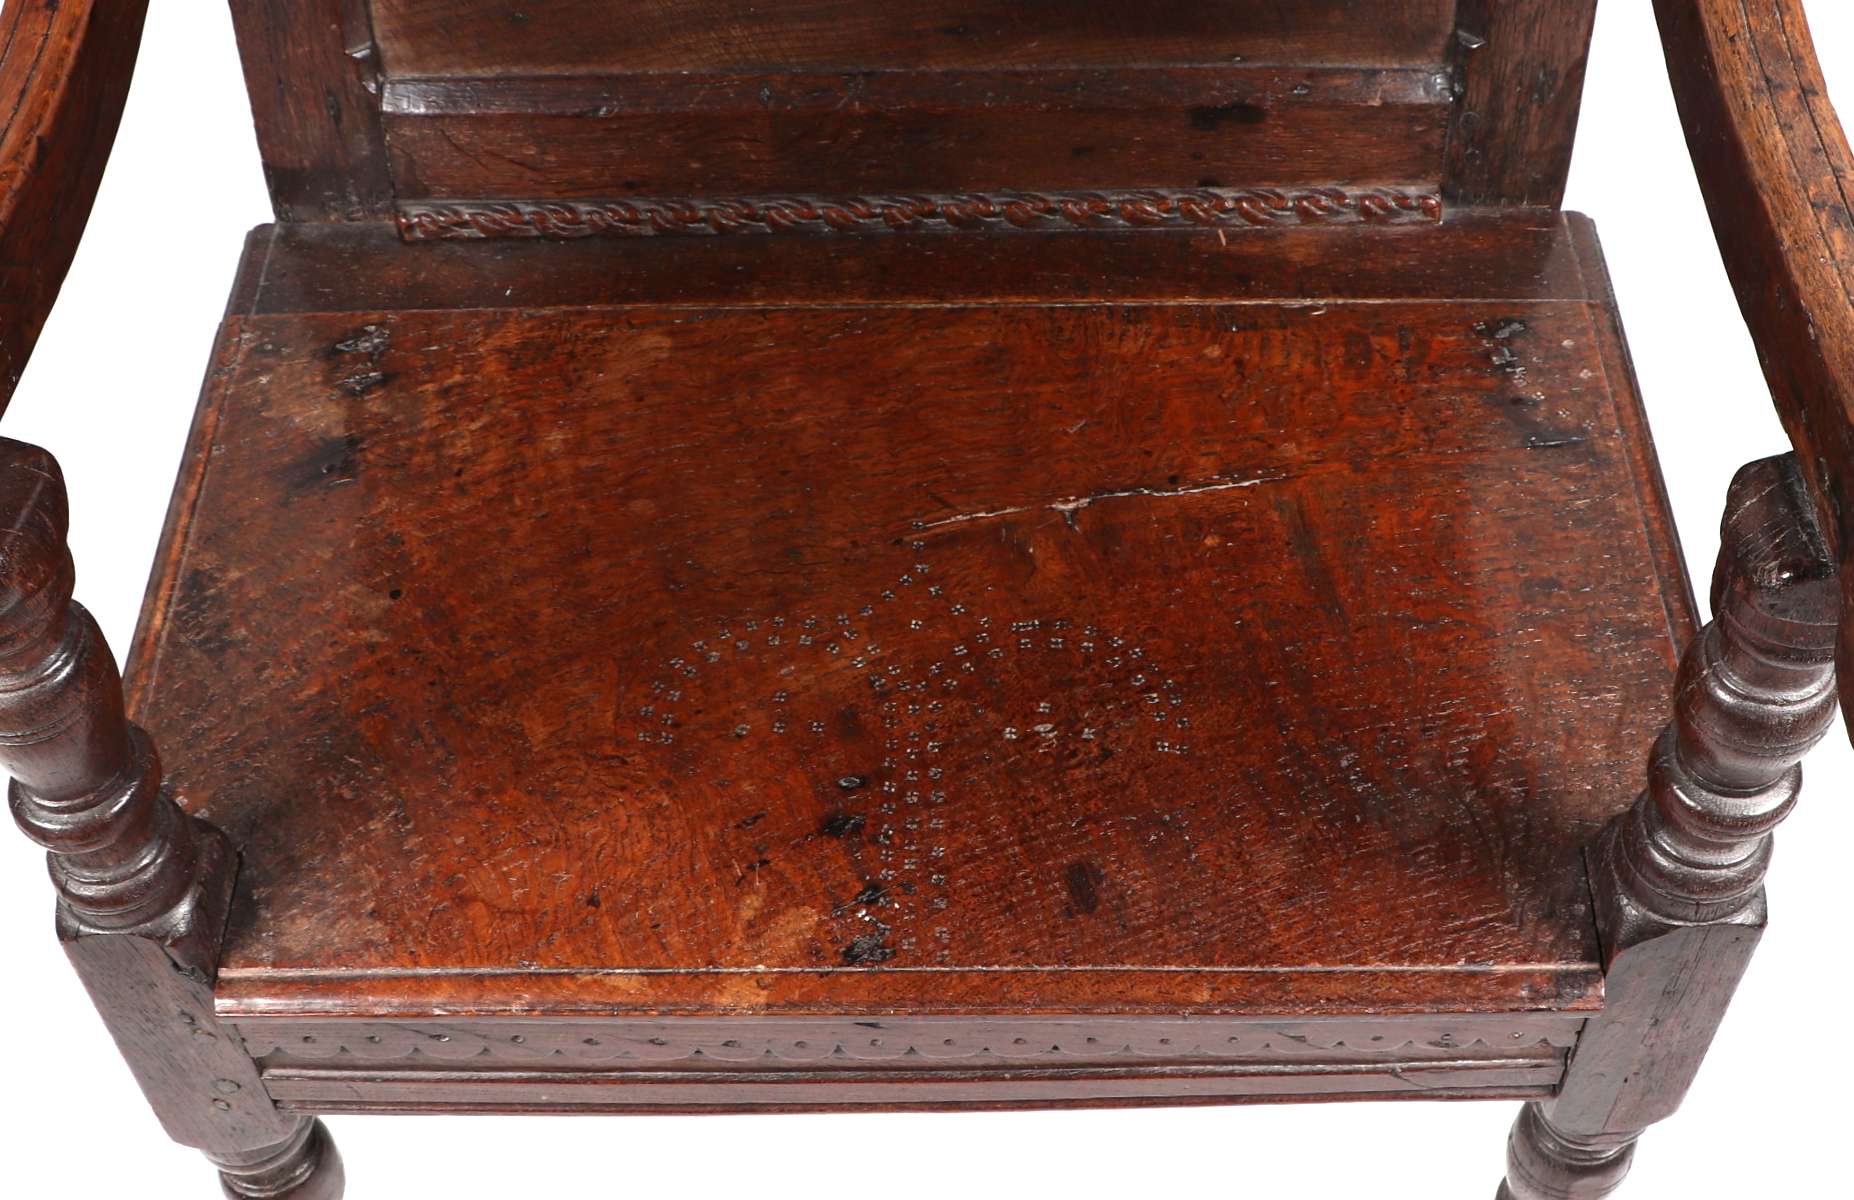 An 18th century style Wainscot type oak chair. - Image 6 of 8